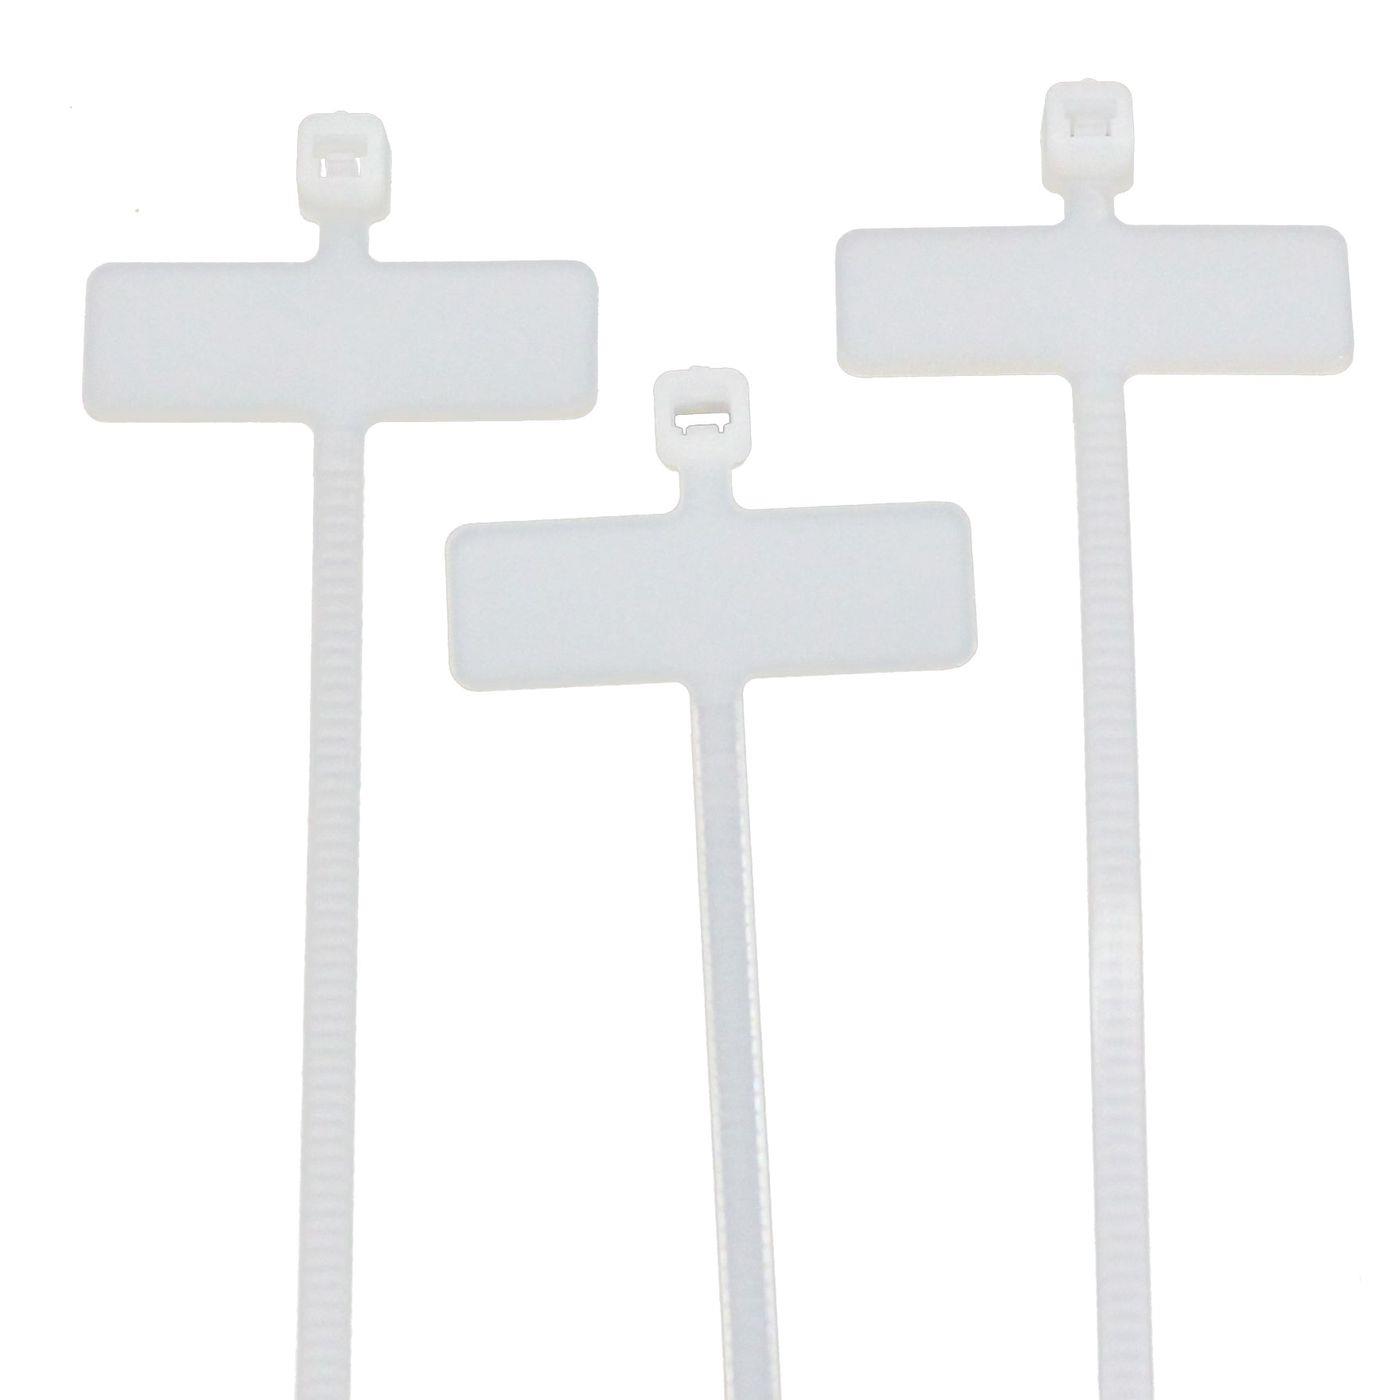 100x Cable tie with Text label 25x8mm 100 x 2,5mm White Natural 8kg PA6.6 Polyamide Industrial quality